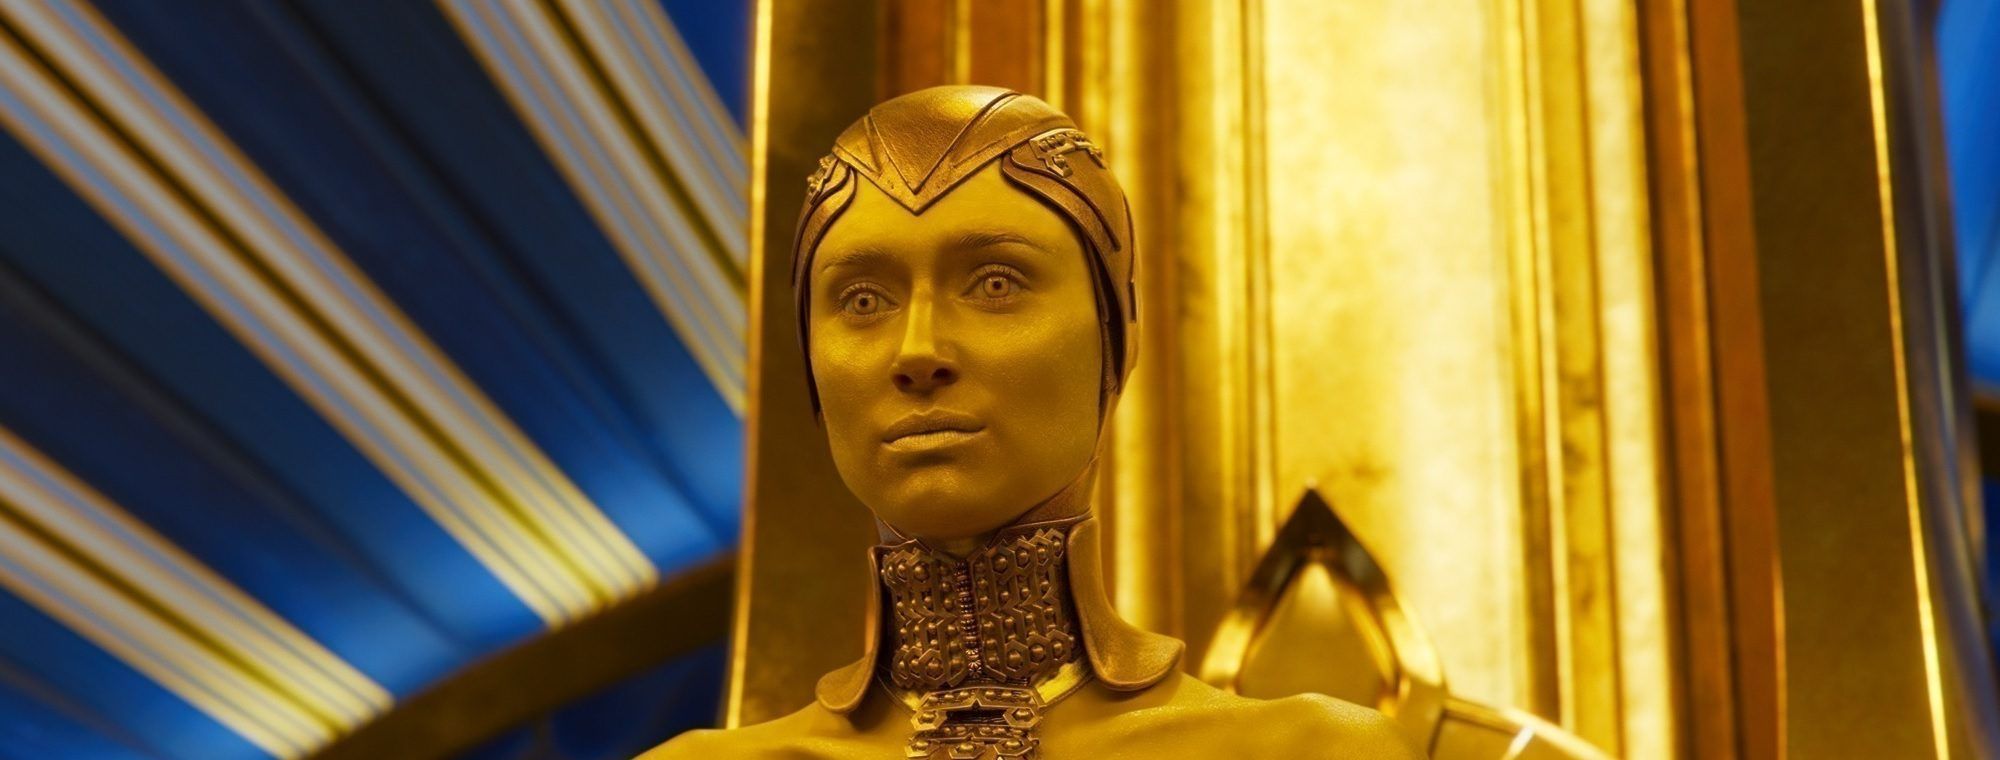 Sovereign leader Ayesha in Guardians of the Galaxy Vol. 2